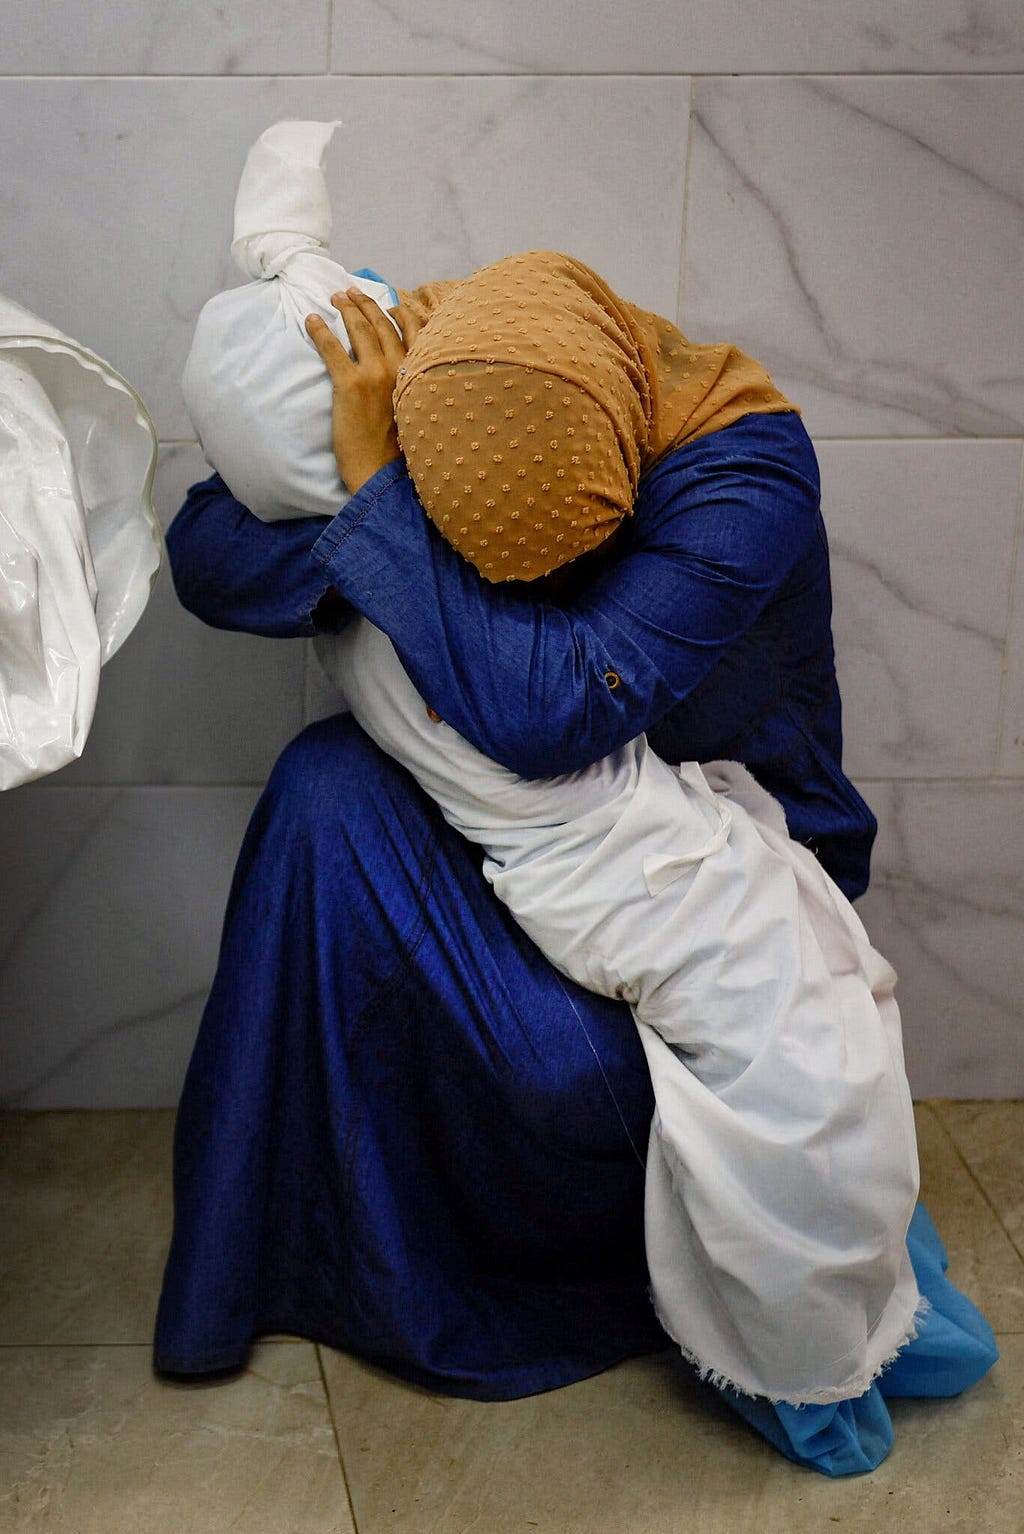 A grieving mother holds her dead child.